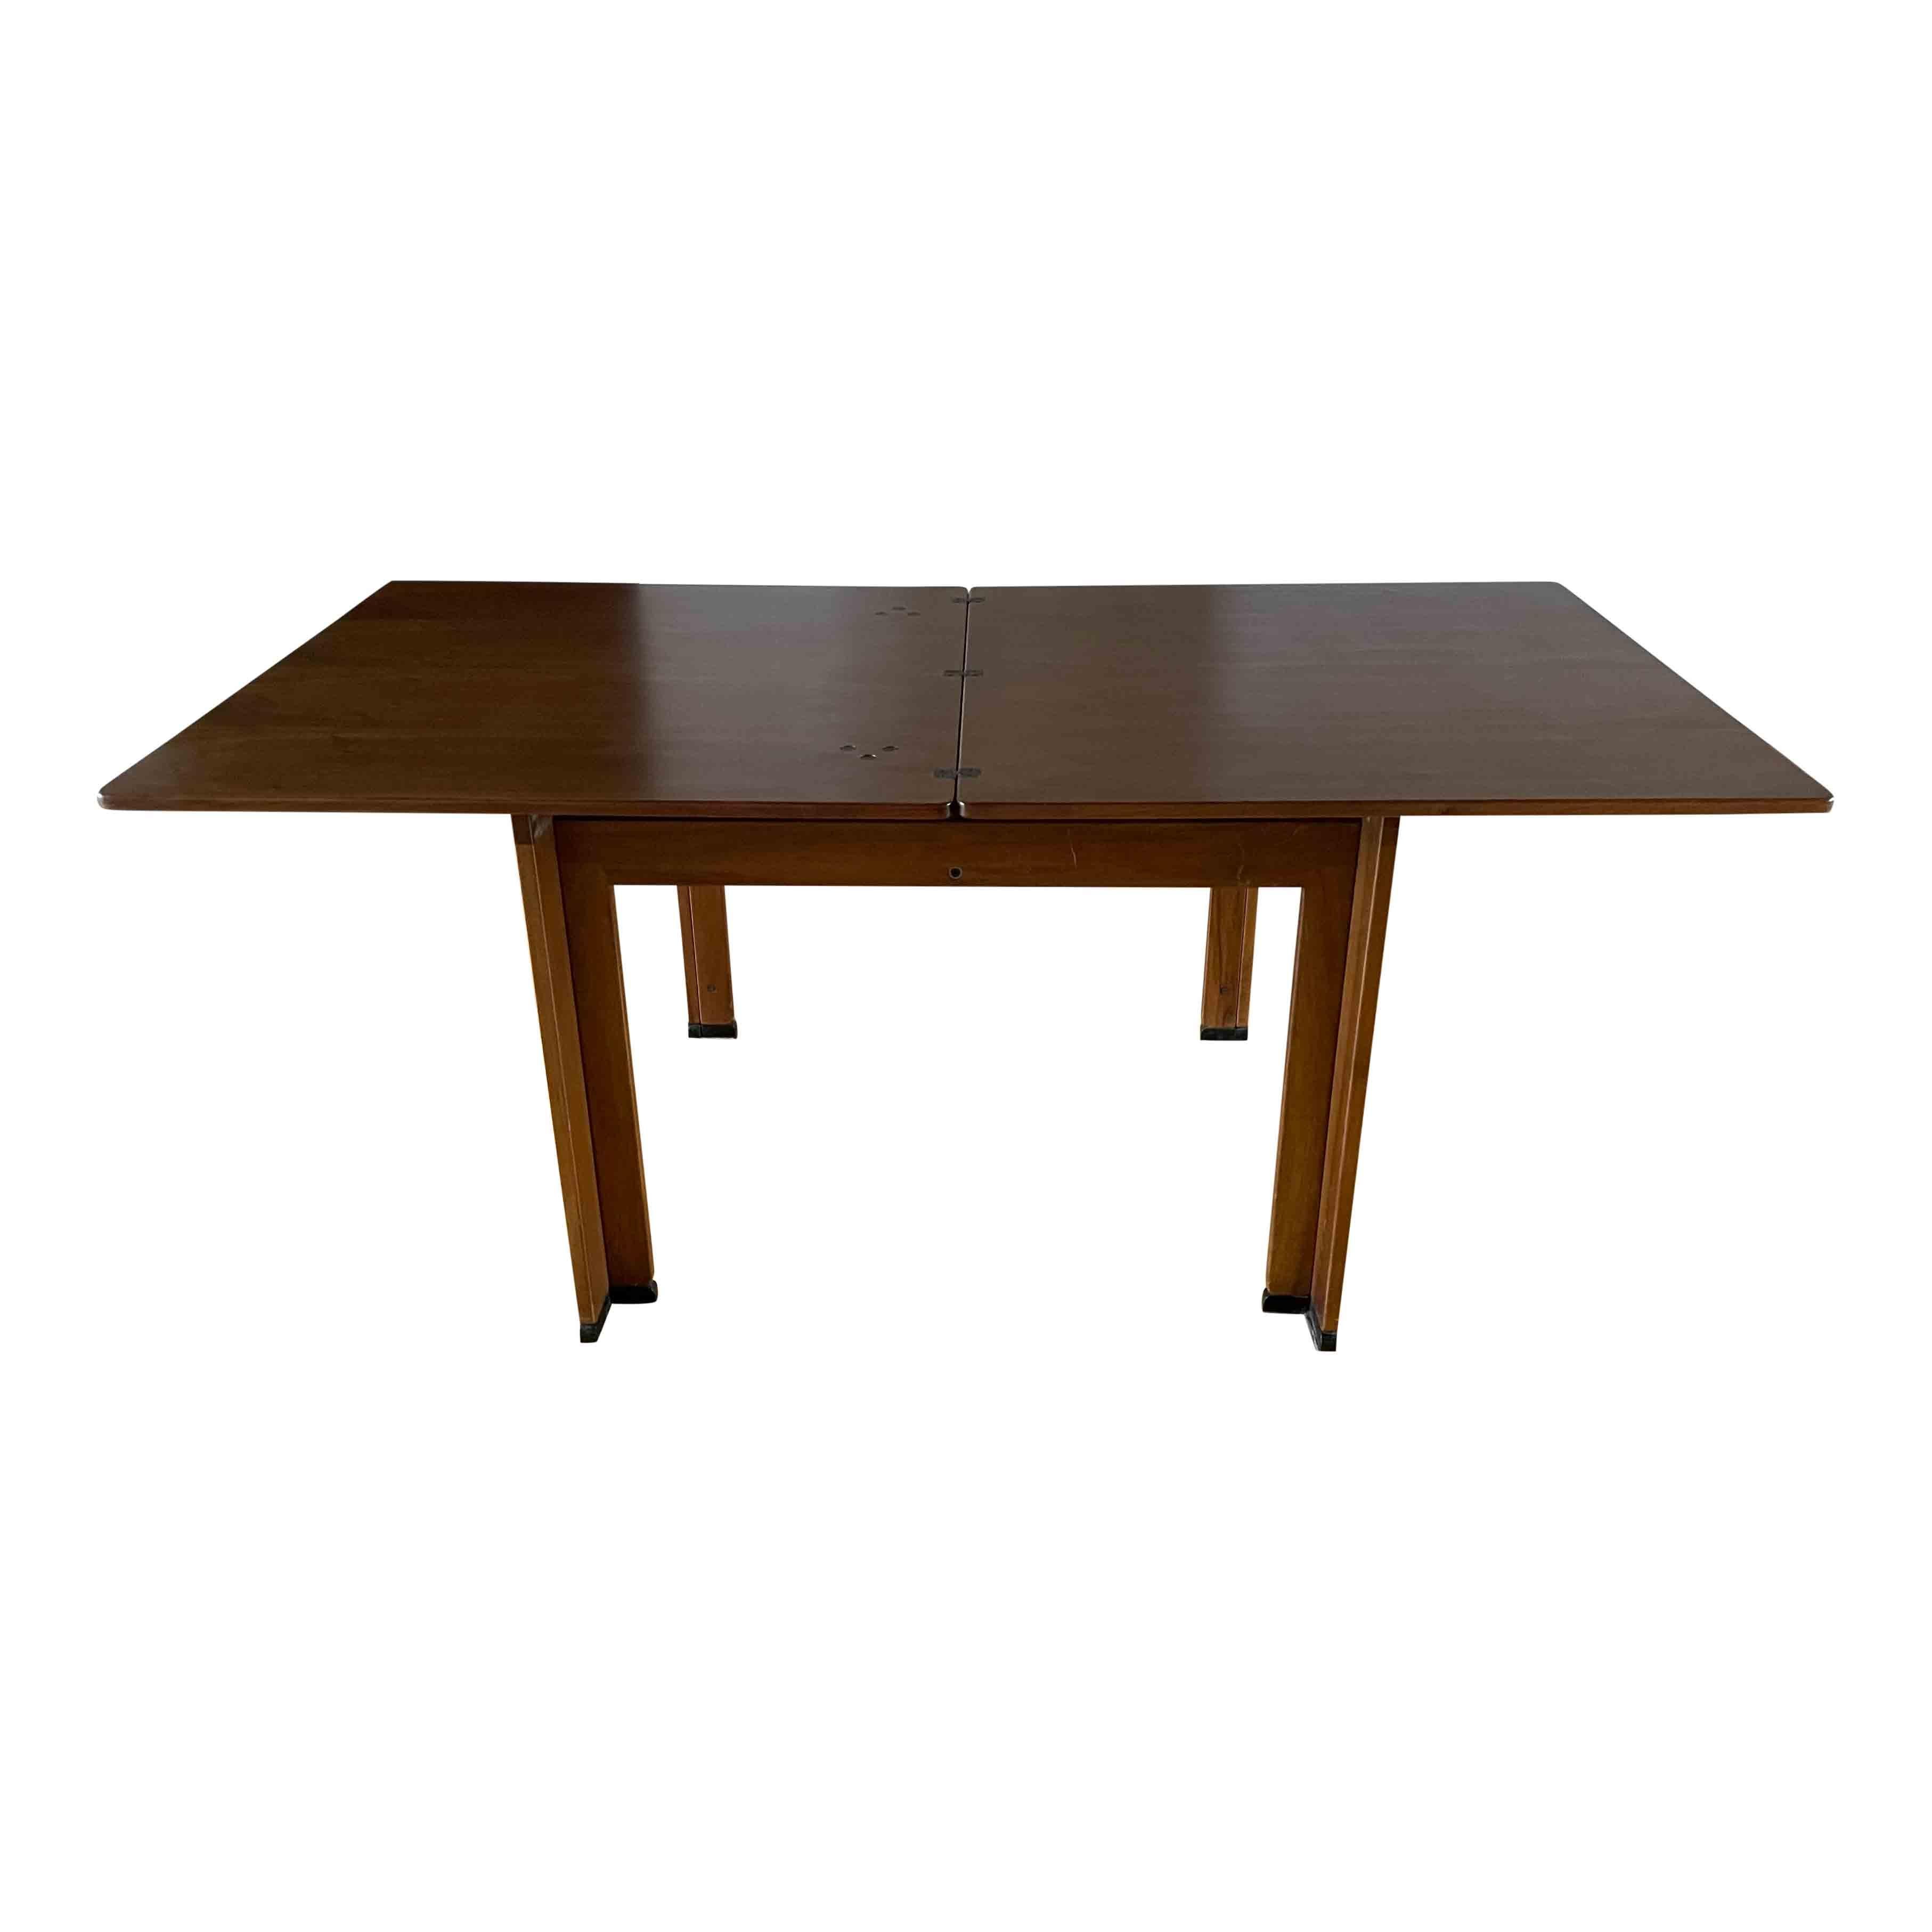 Italian Afra & Tobia Scarpa Midcentury “778” Extensible Dining Table for Cassina, 1967